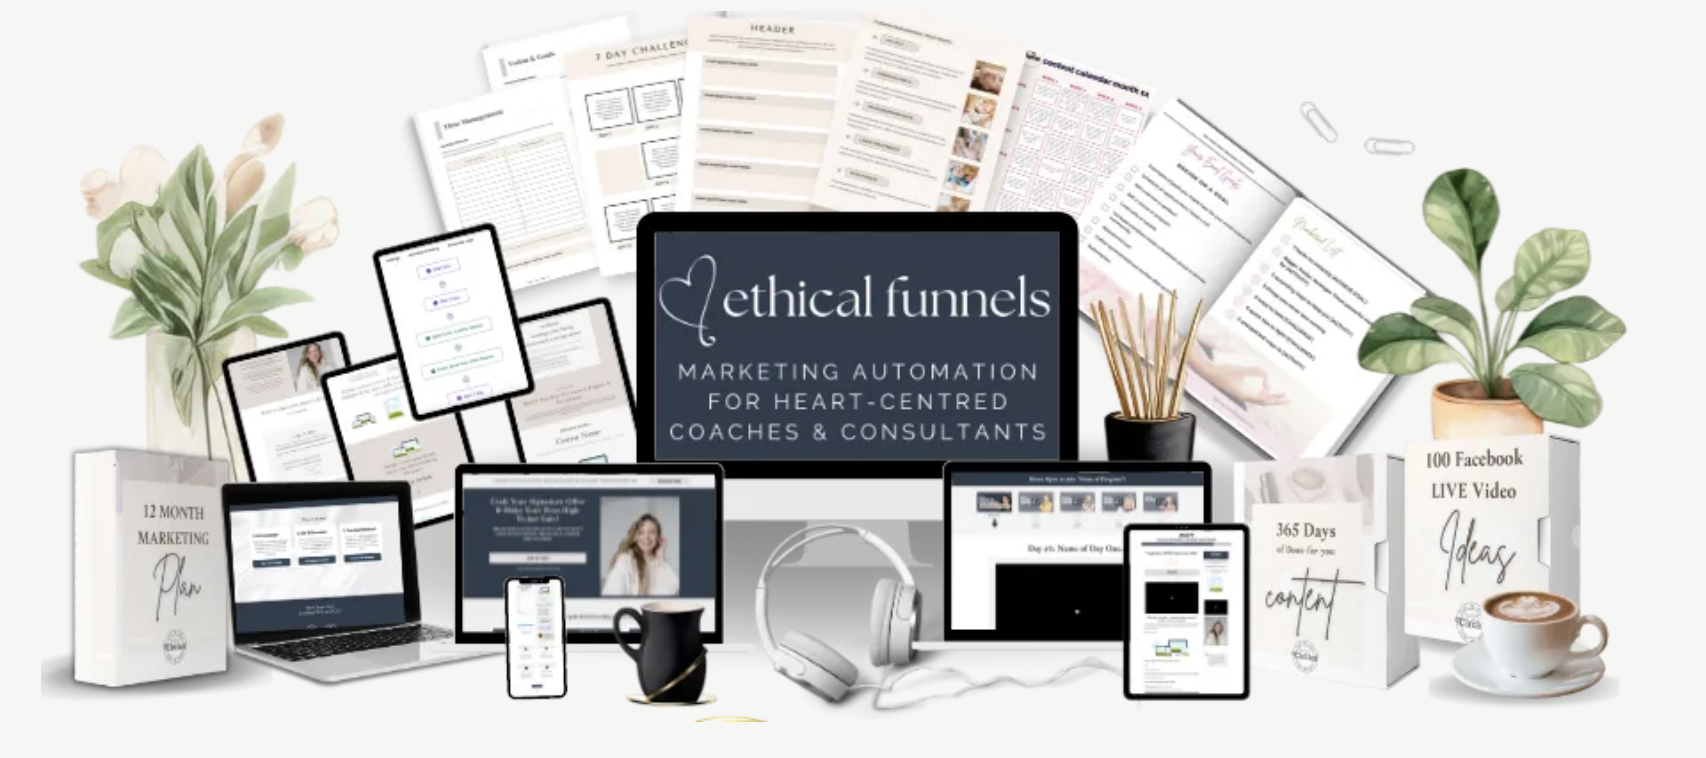 ethical funnels